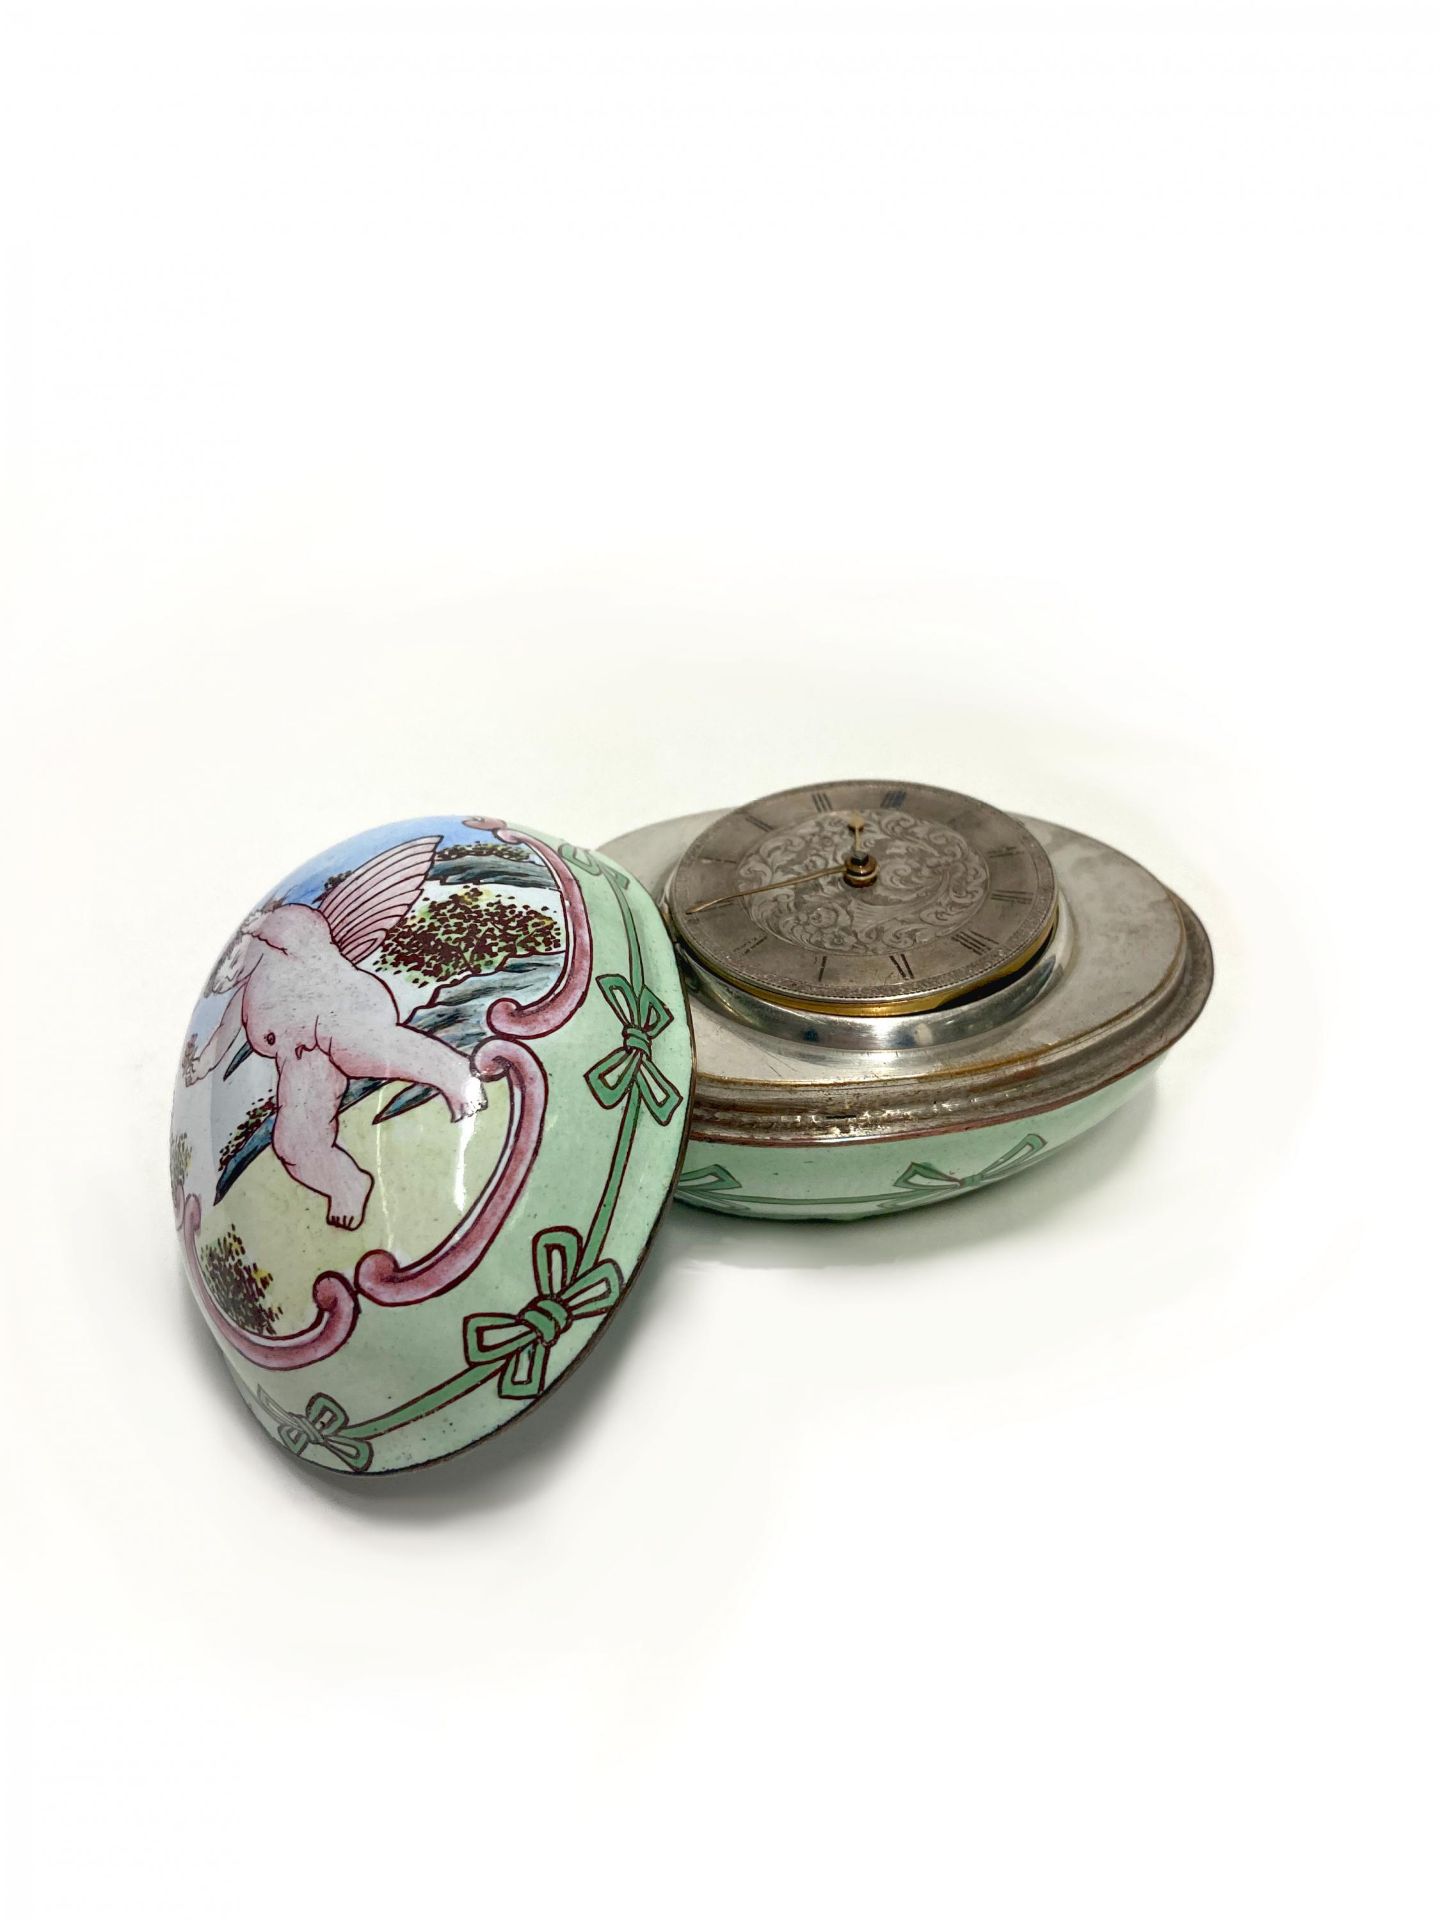 Small table clock in egg-shaped case with amoretto - Image 8 of 8